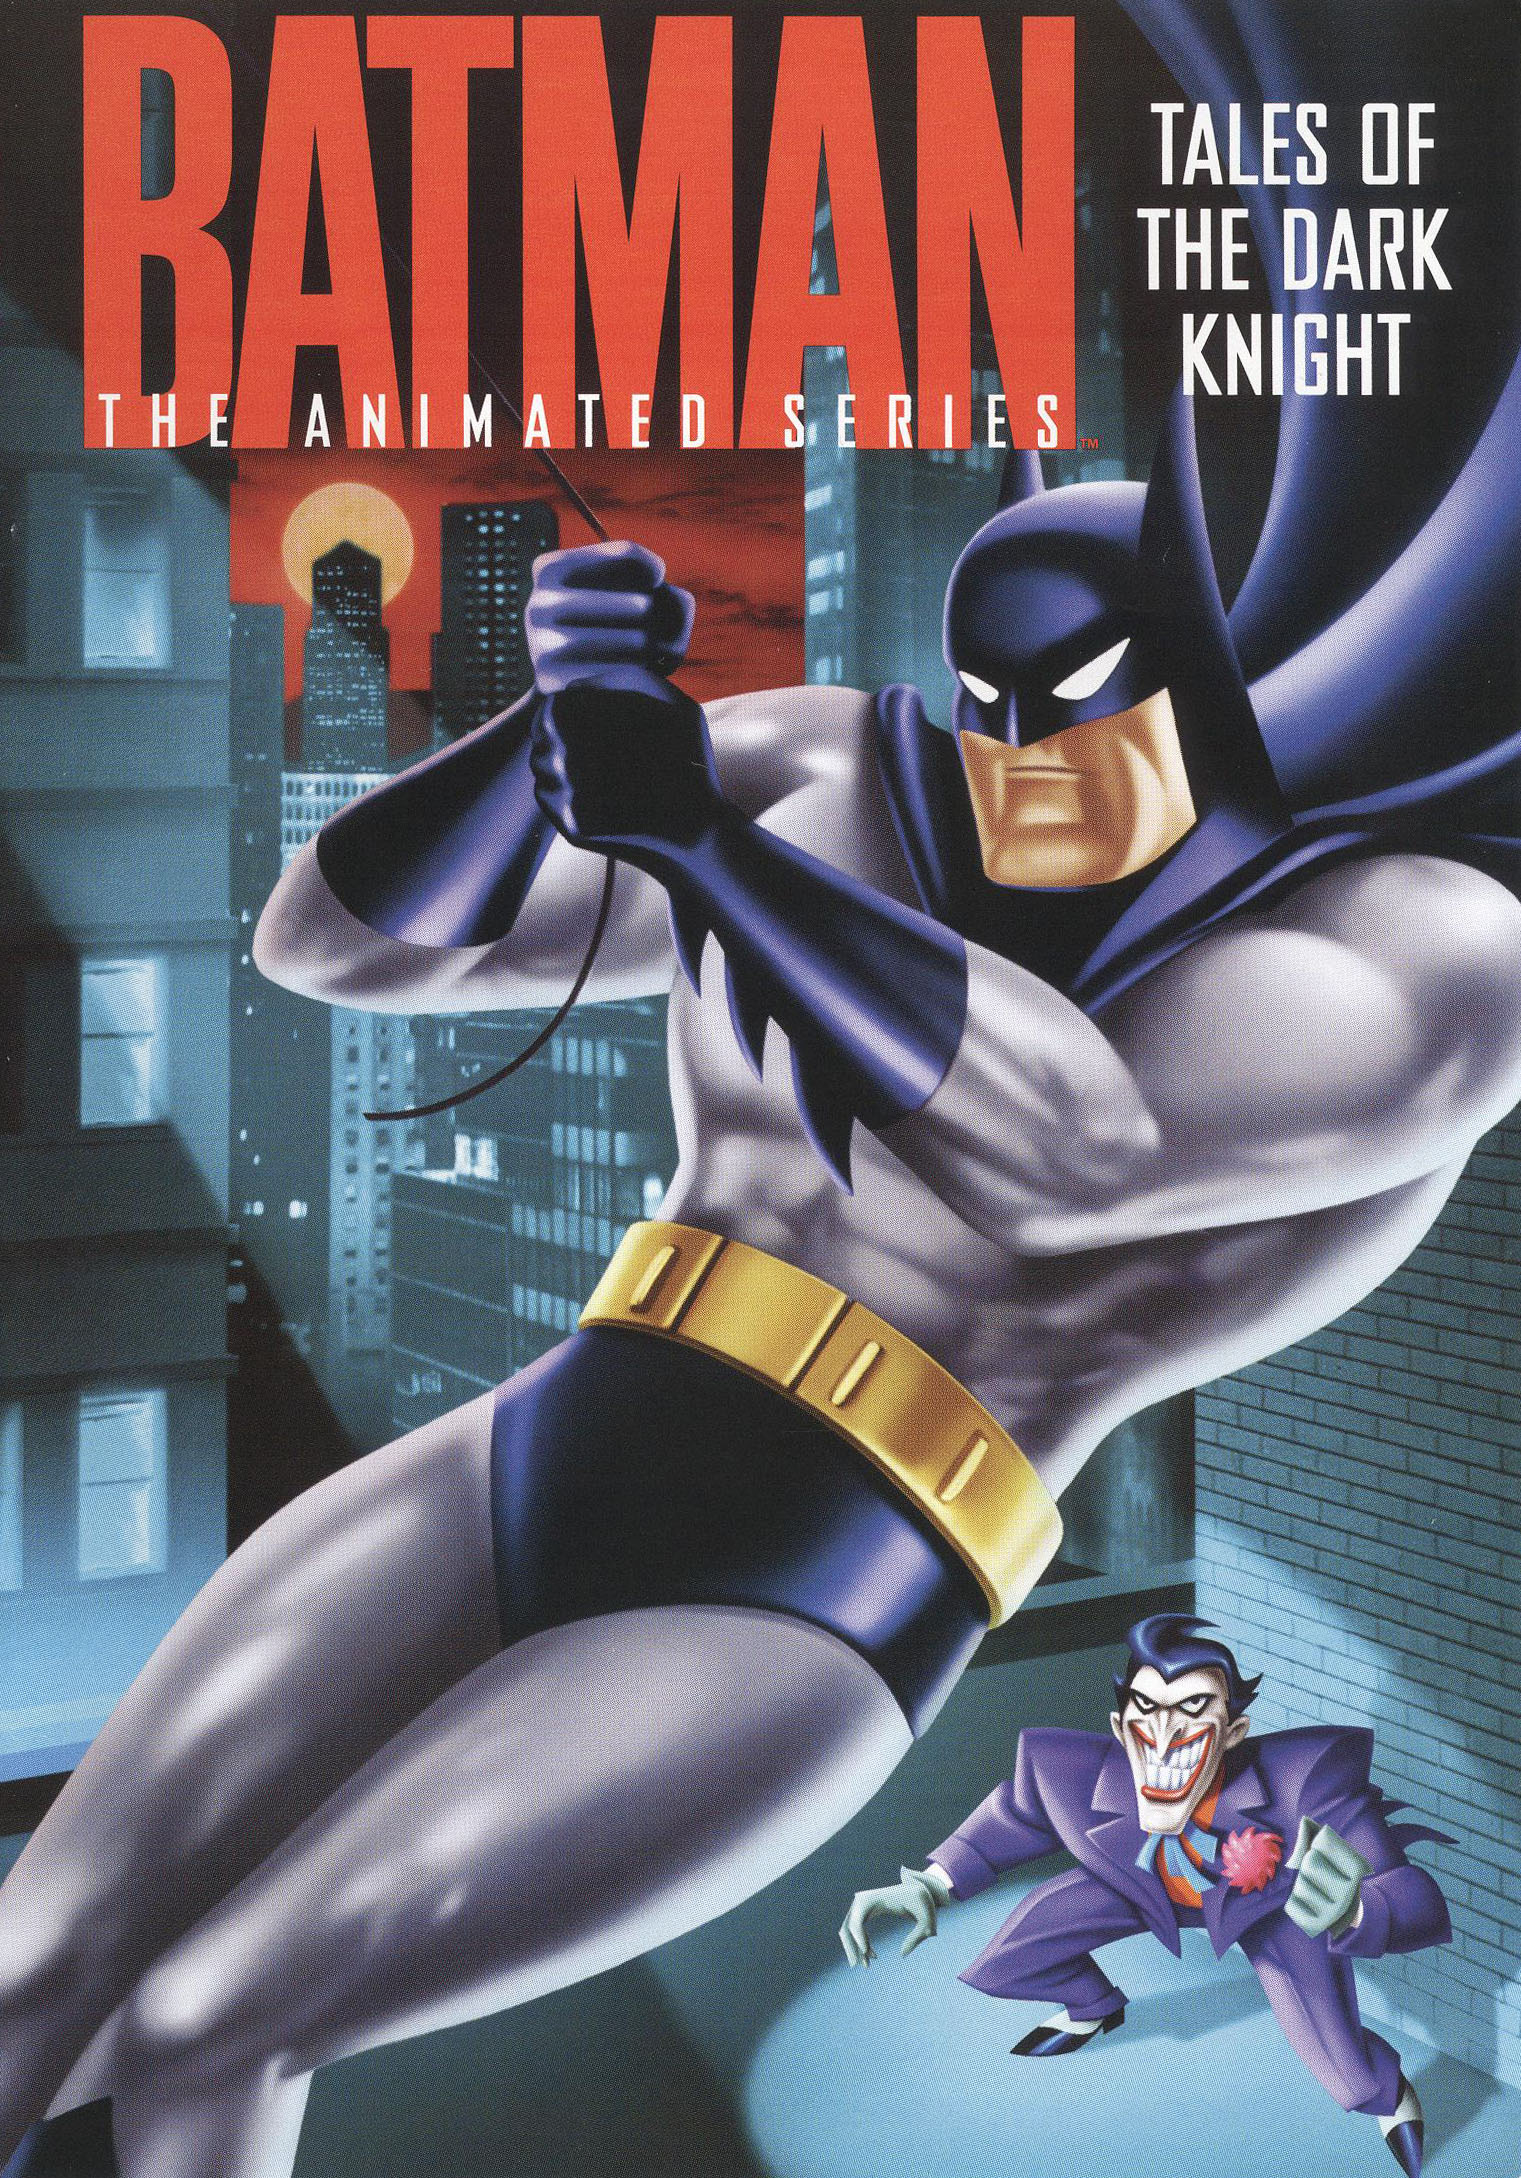 Customer Reviews: Batman: The Animated Series Tales of the Dark Knight -  Best Buy